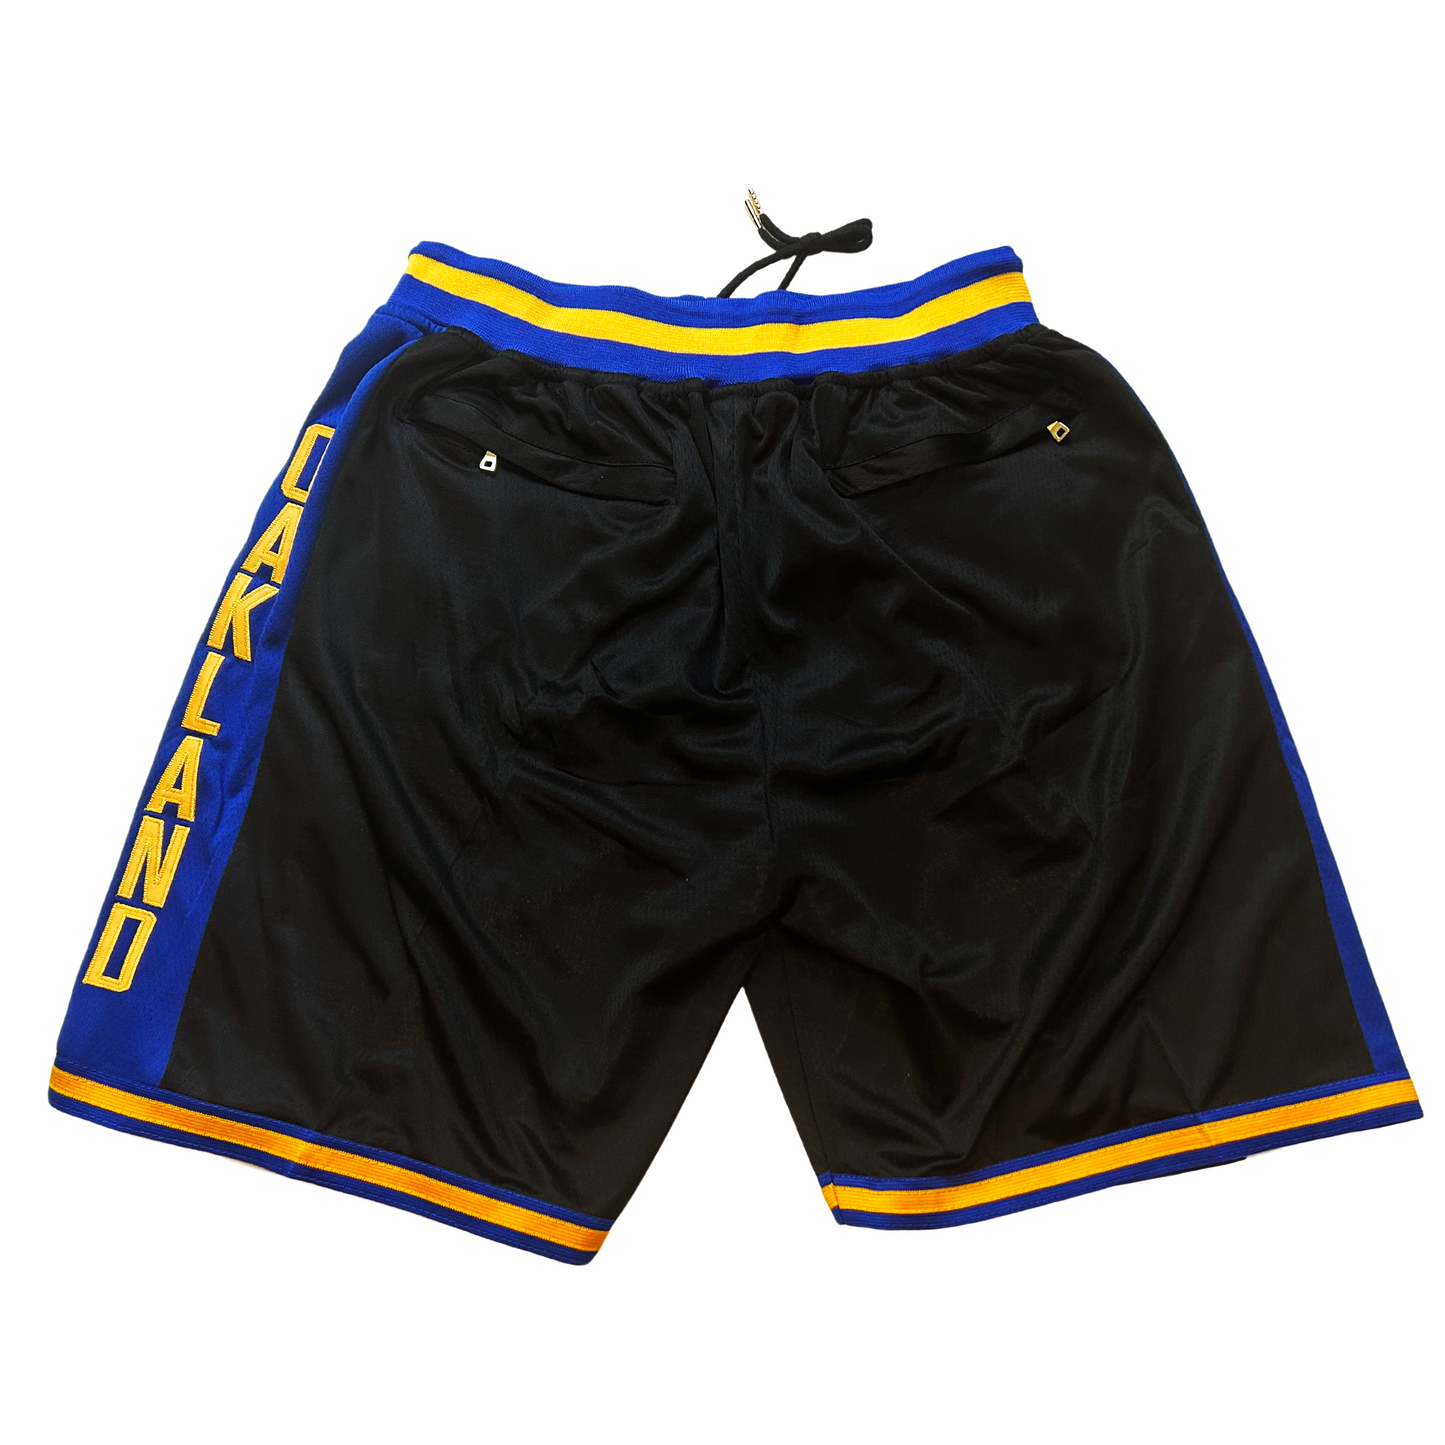 The Town Basketball Shorts